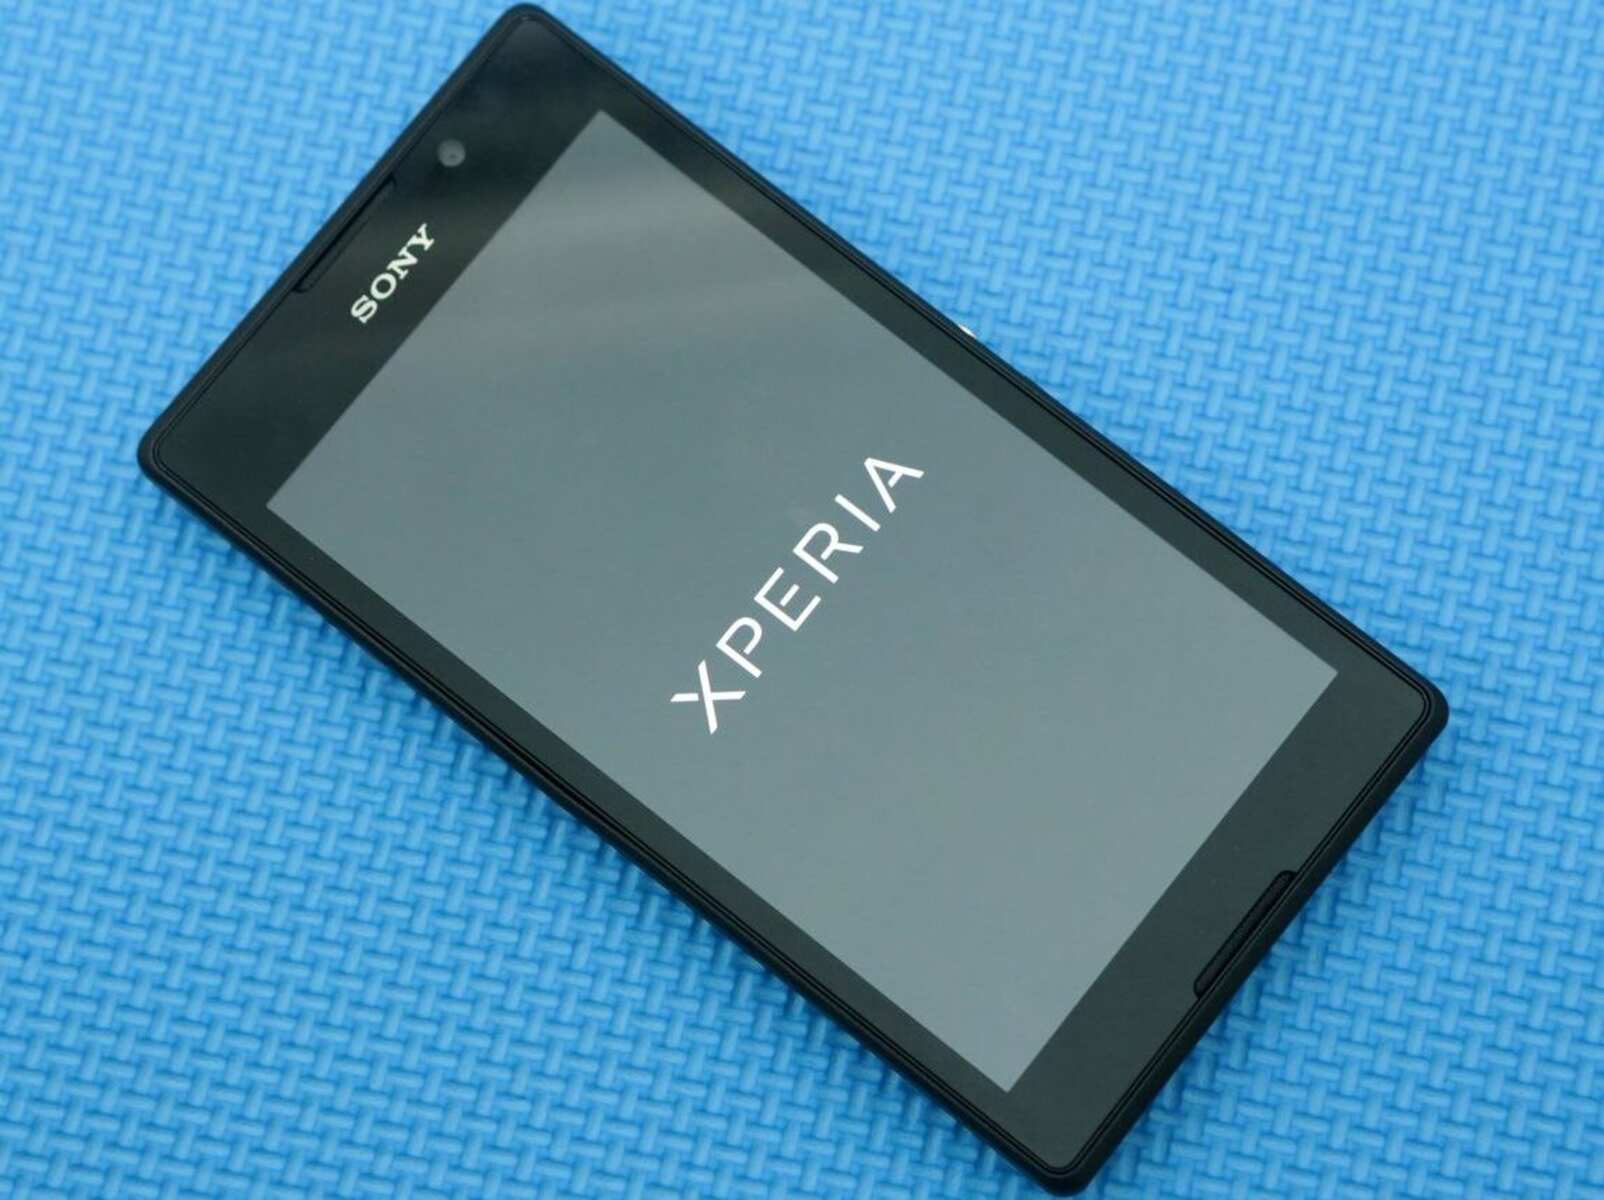 sony-xperia-c-rooting-tutorial-customization-guide